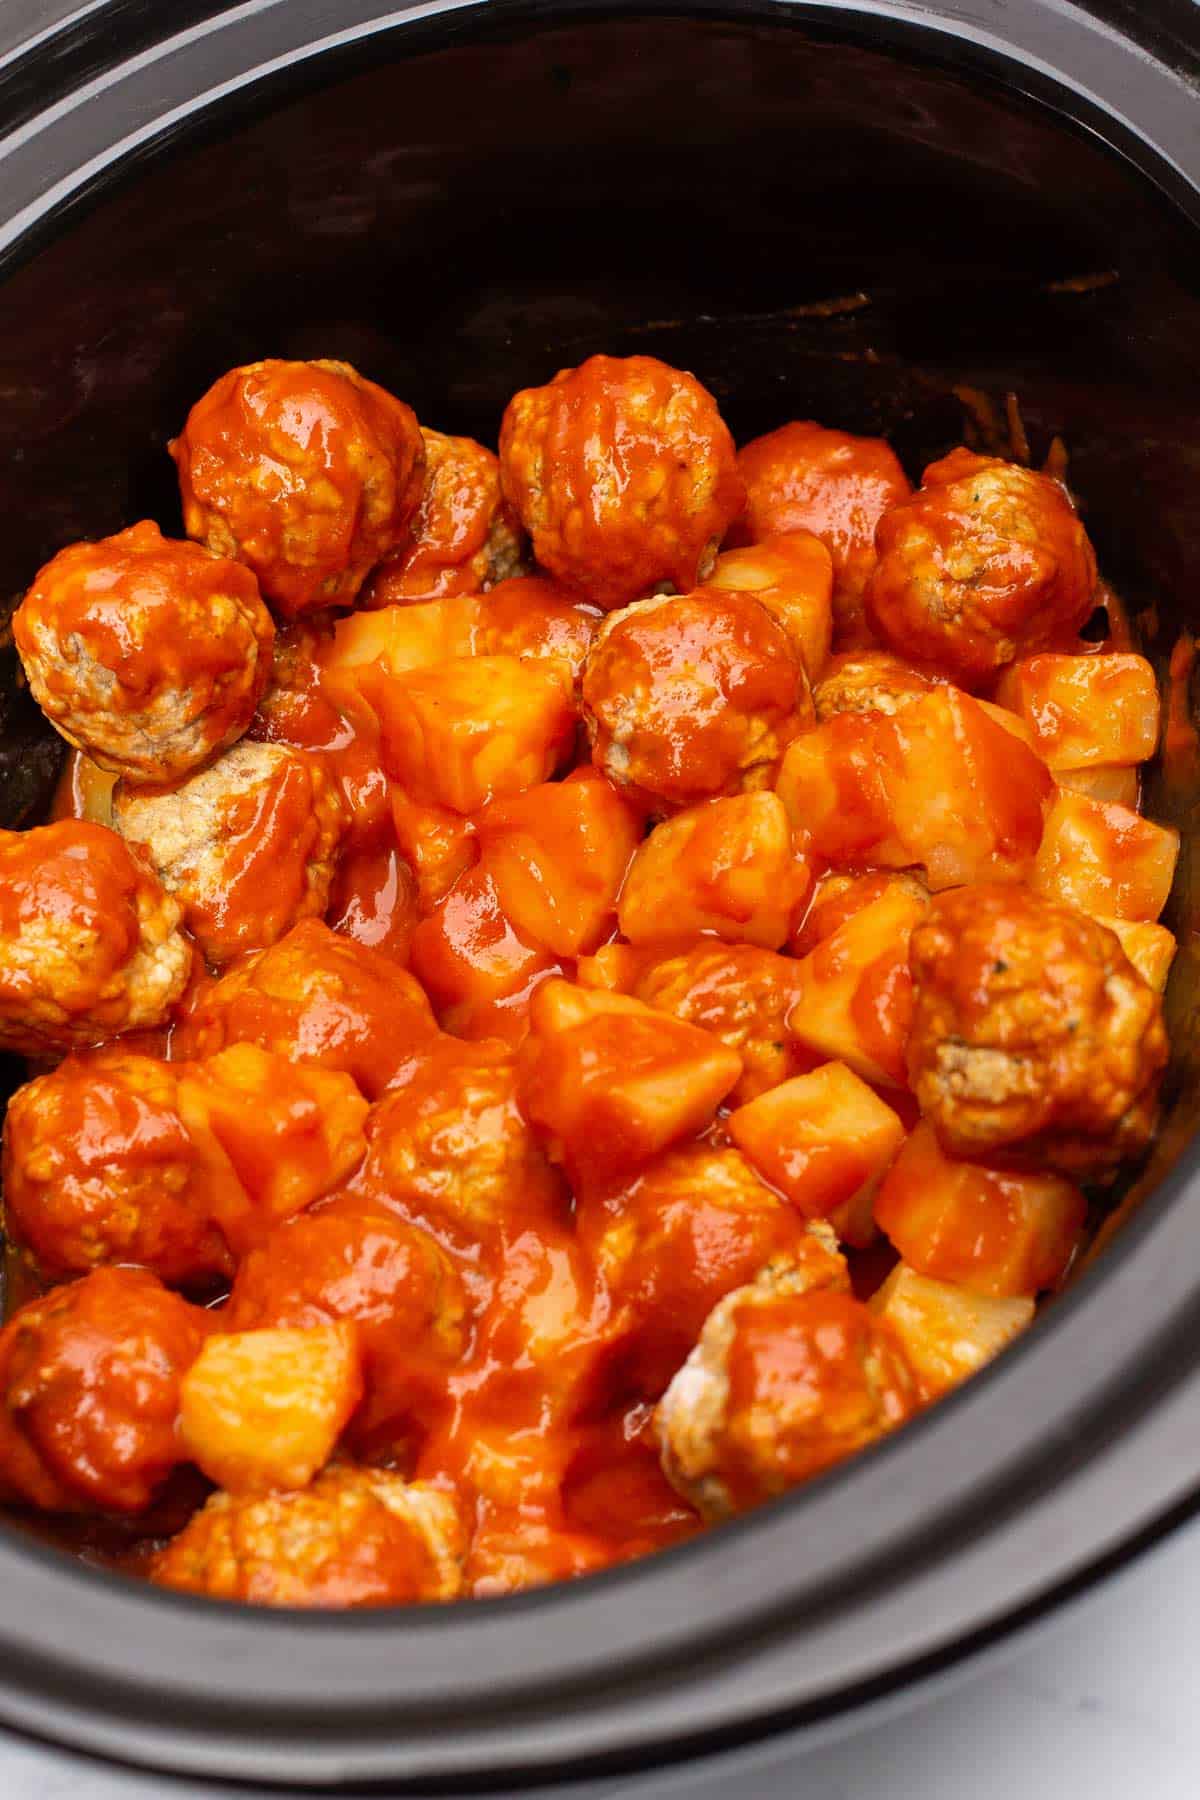 Frozen meatballs, sloppy joe sauce, and pineapple chunks tossed together in the slow cooker.